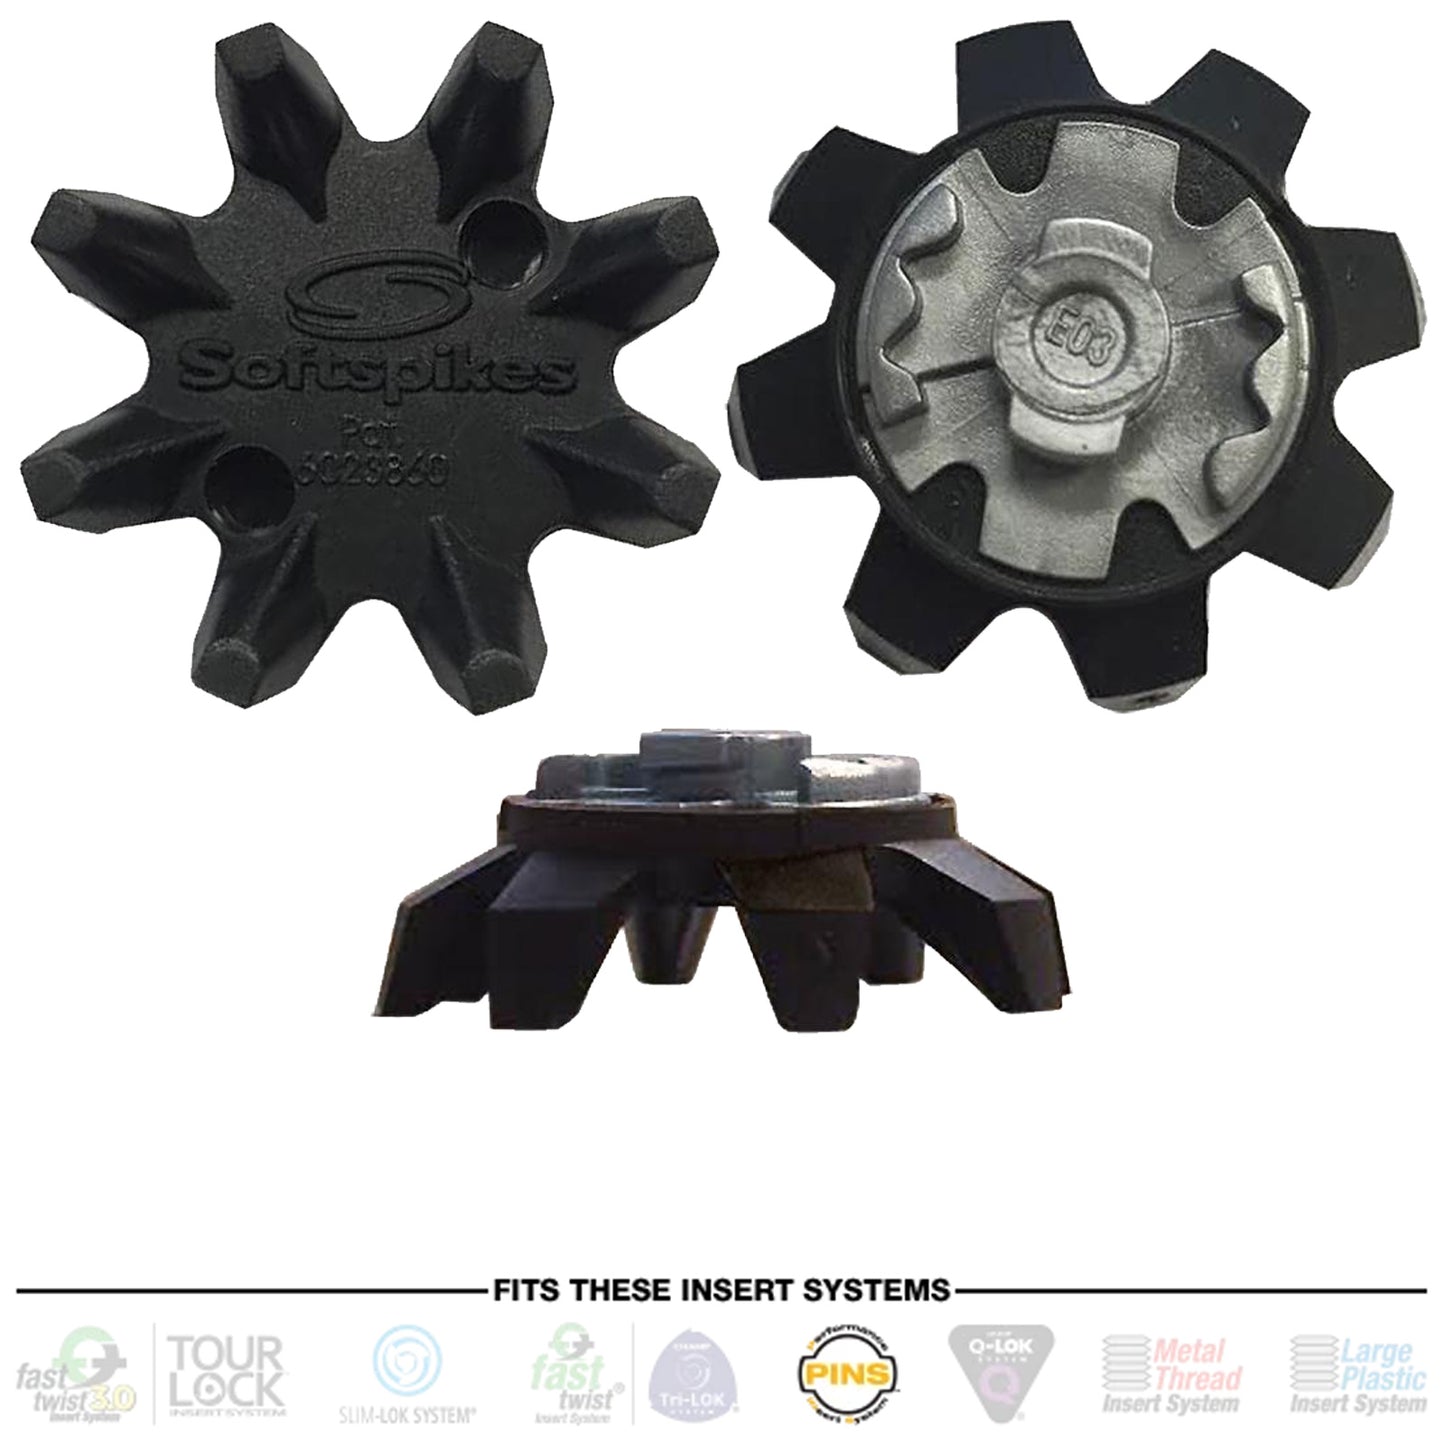 SoftSpikes Black Widow Replacement Golf Cleats